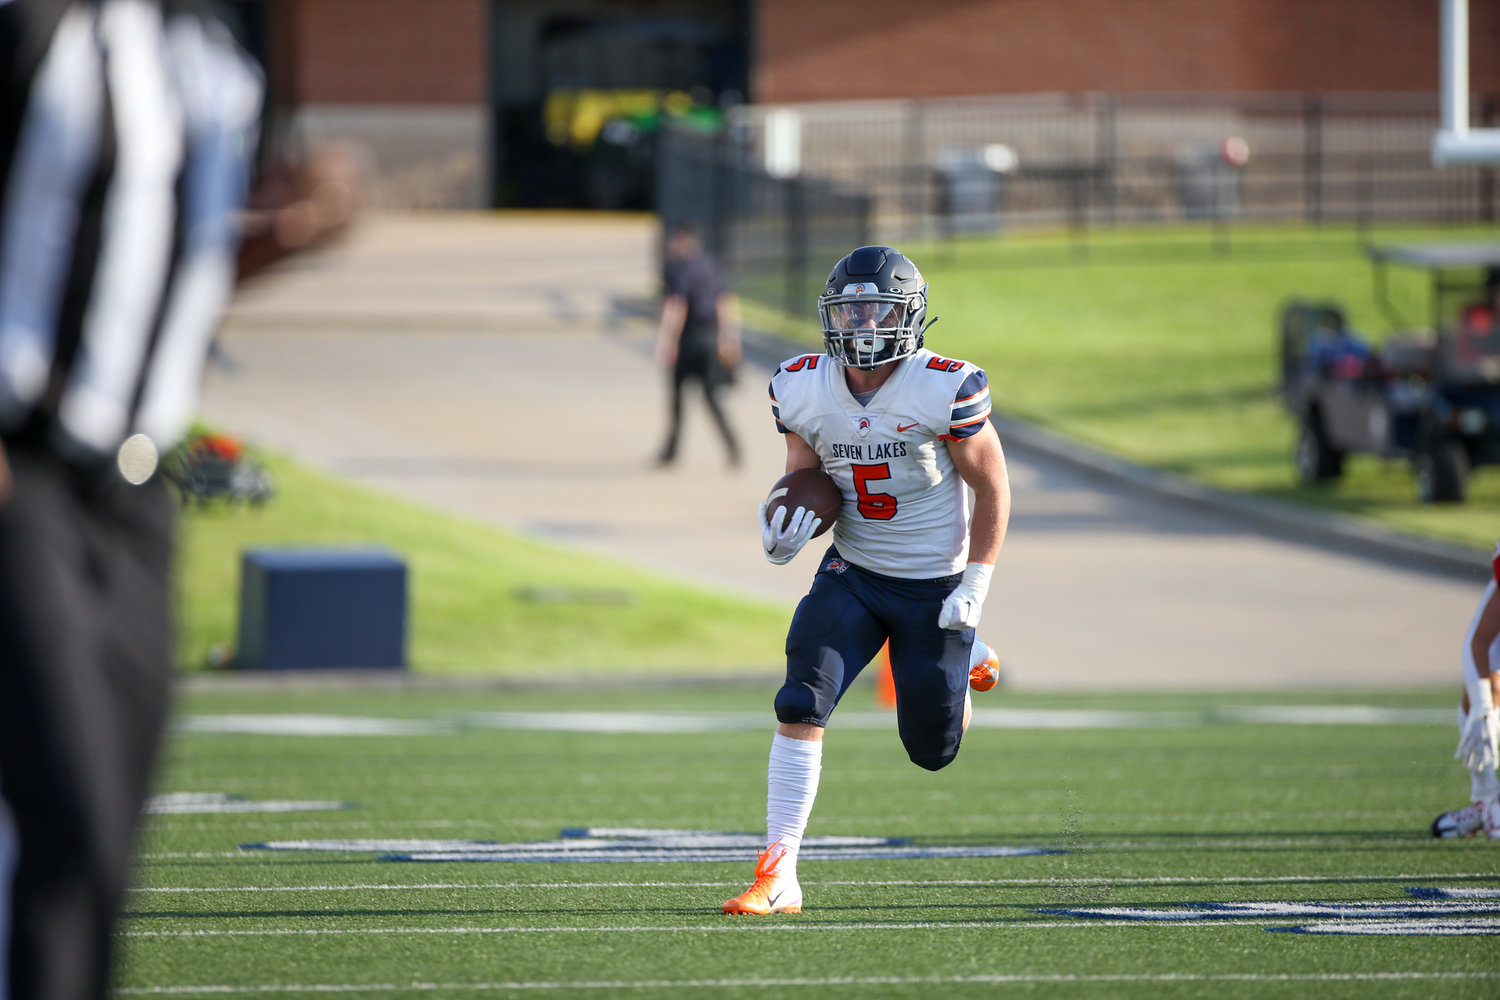 Seven Lakes Spartans running back Barrett Hudson (5) runs in the first quarter during the game between the Seven Lakes Spartans and Memorial Mustangs on August 25, 2022 in Houston, Texas. Photo Credit: John Glaser - Katy Times